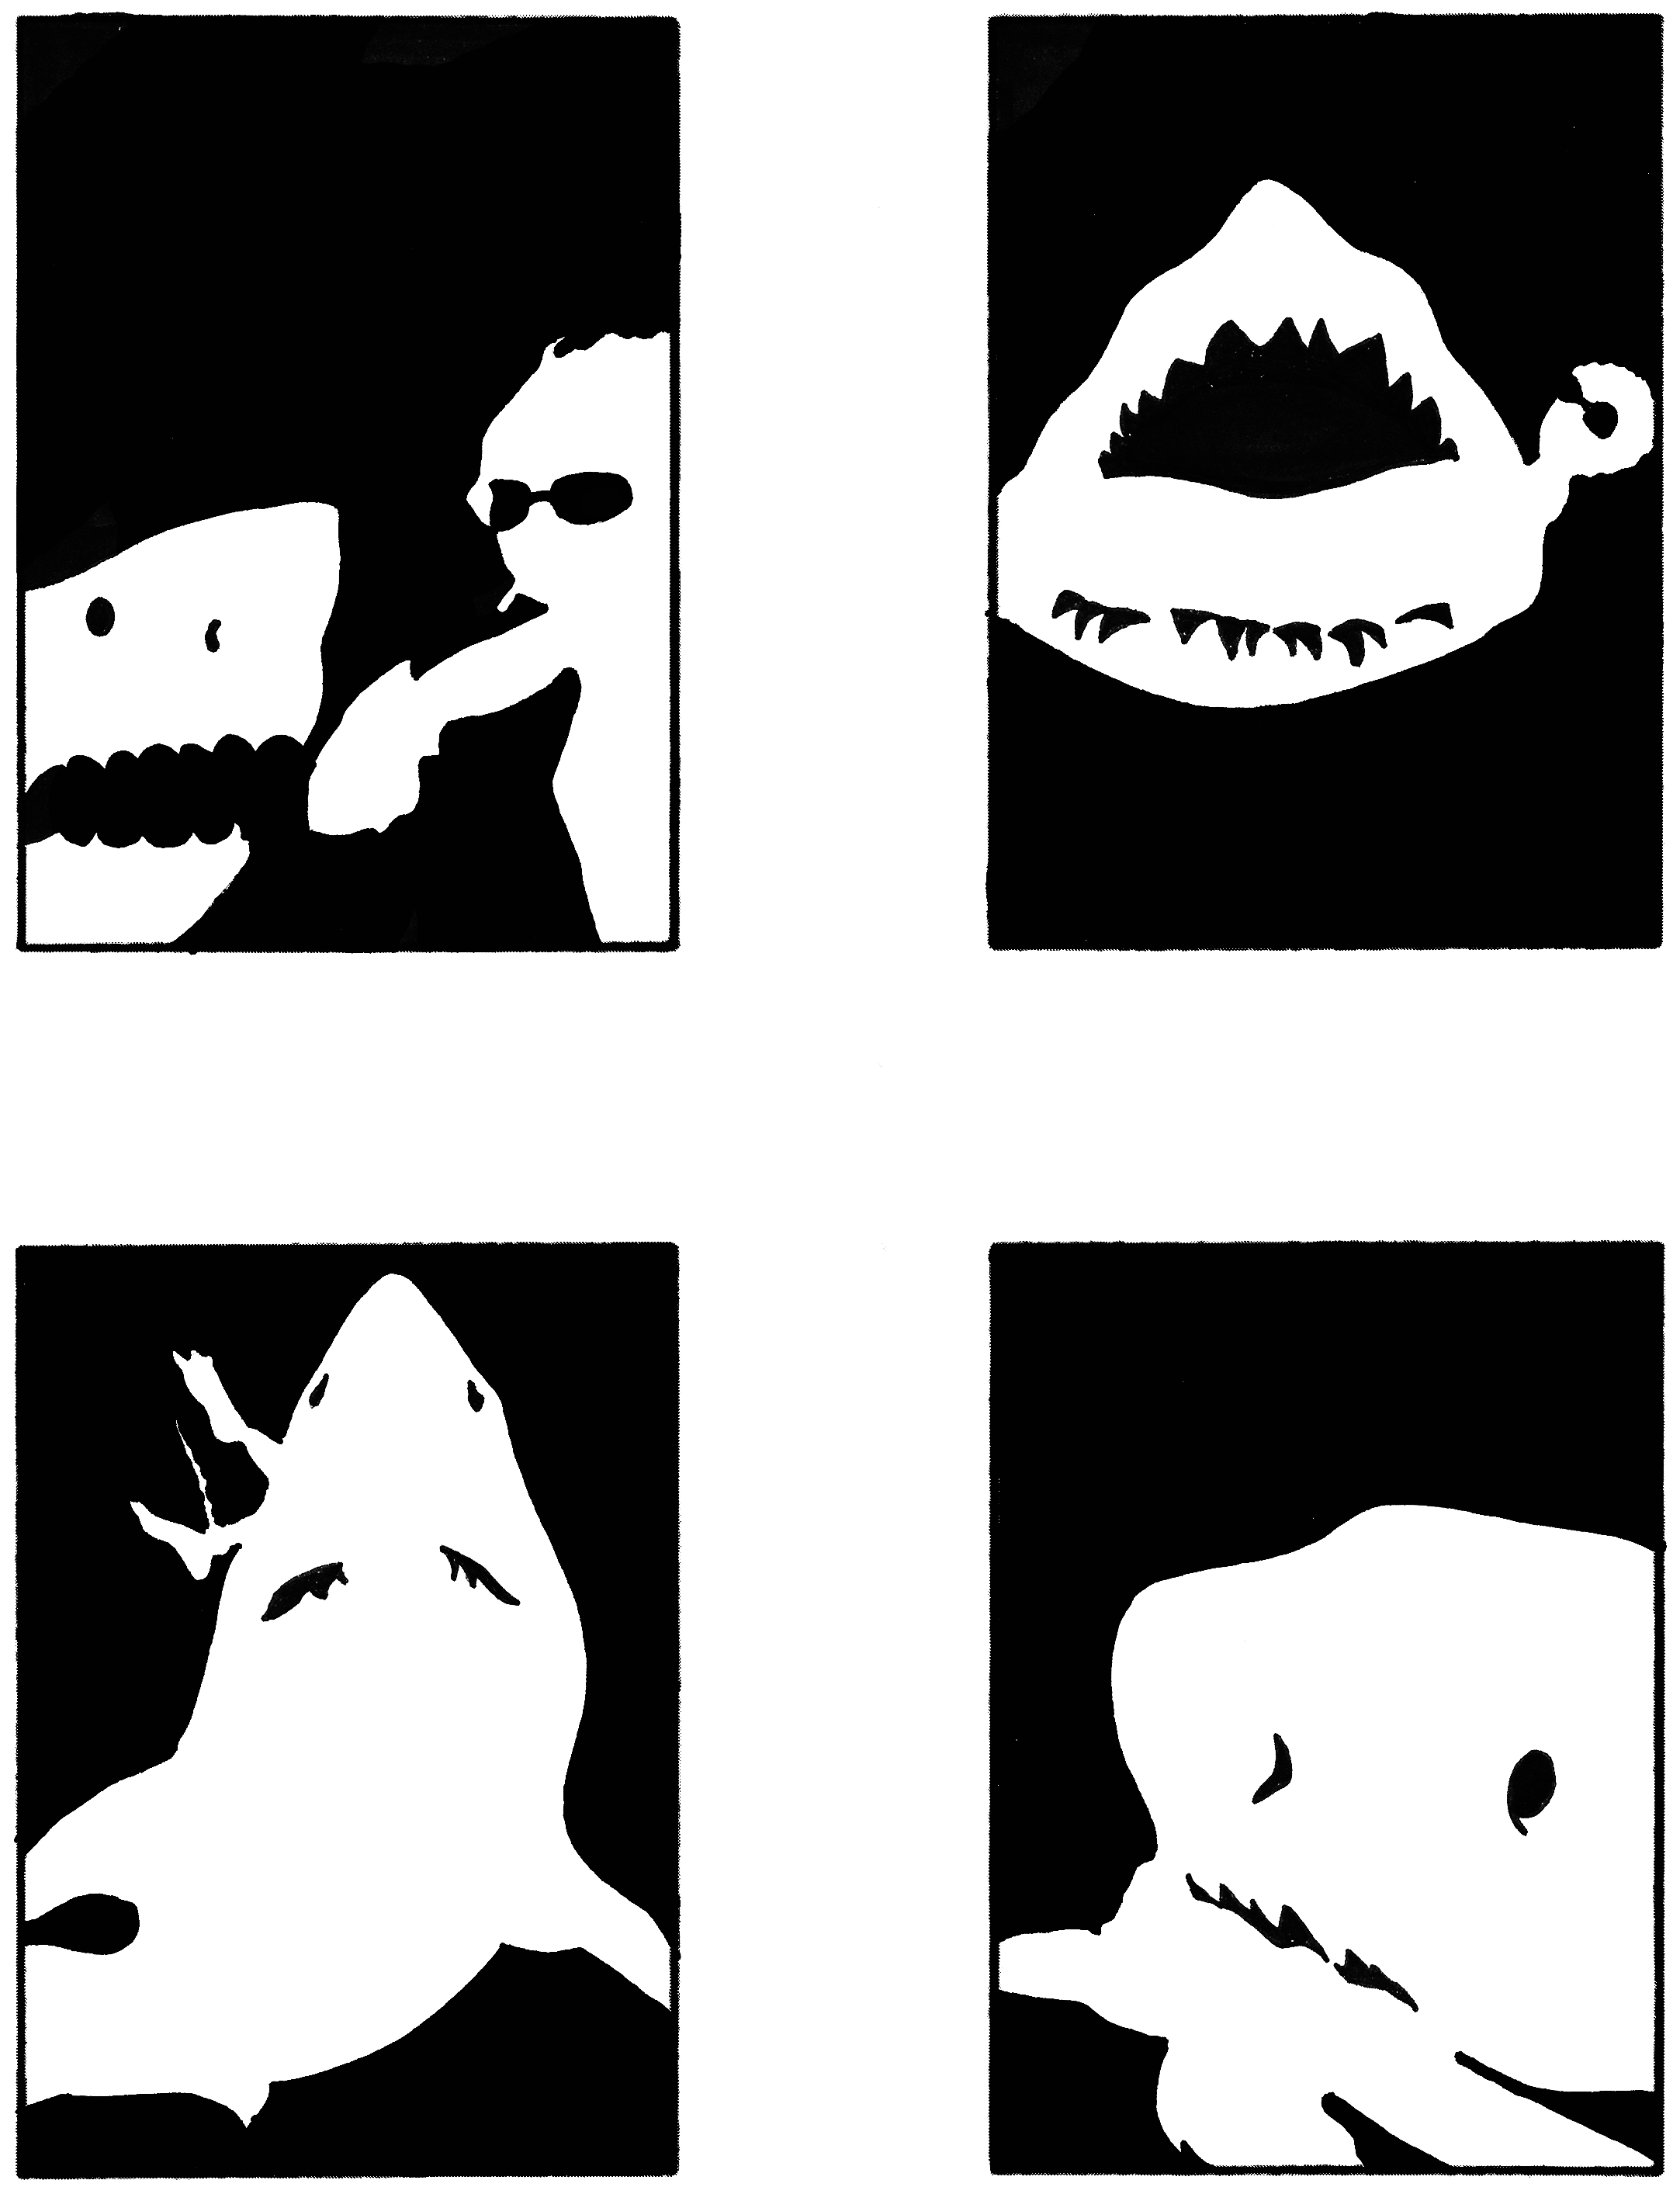 Thumbnails of simplified, 'self-explanatory' visuals for the word 'Jaws' - in reference to the movie